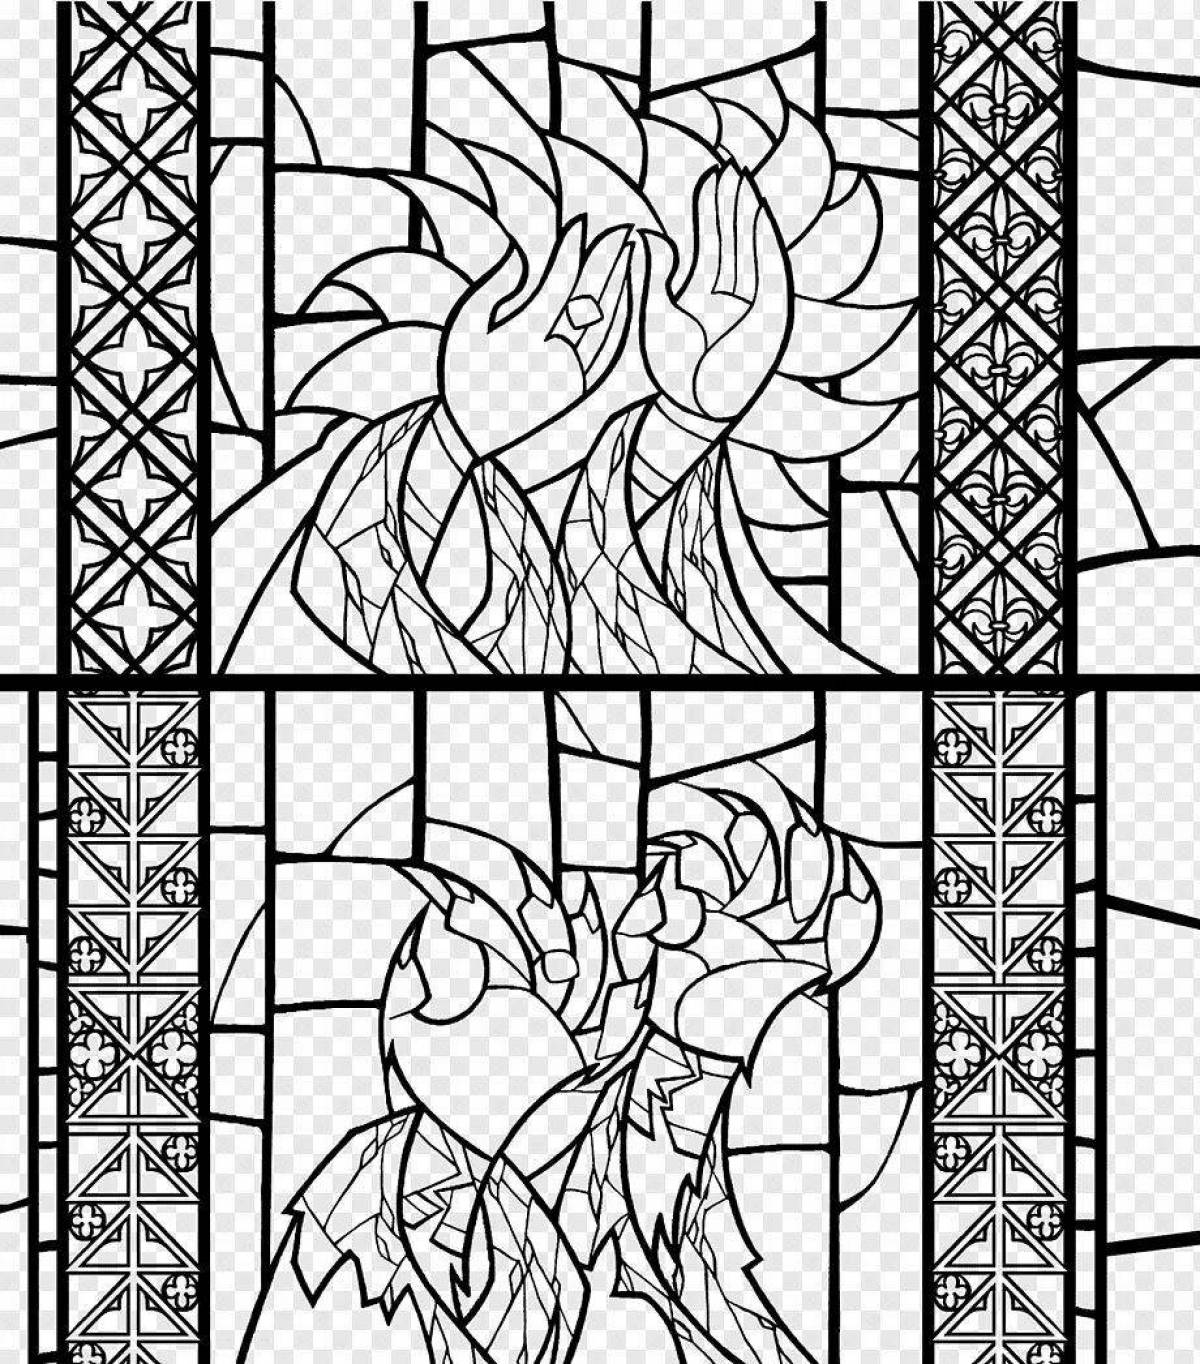 Amazing stained glass coloring pages for the little ones